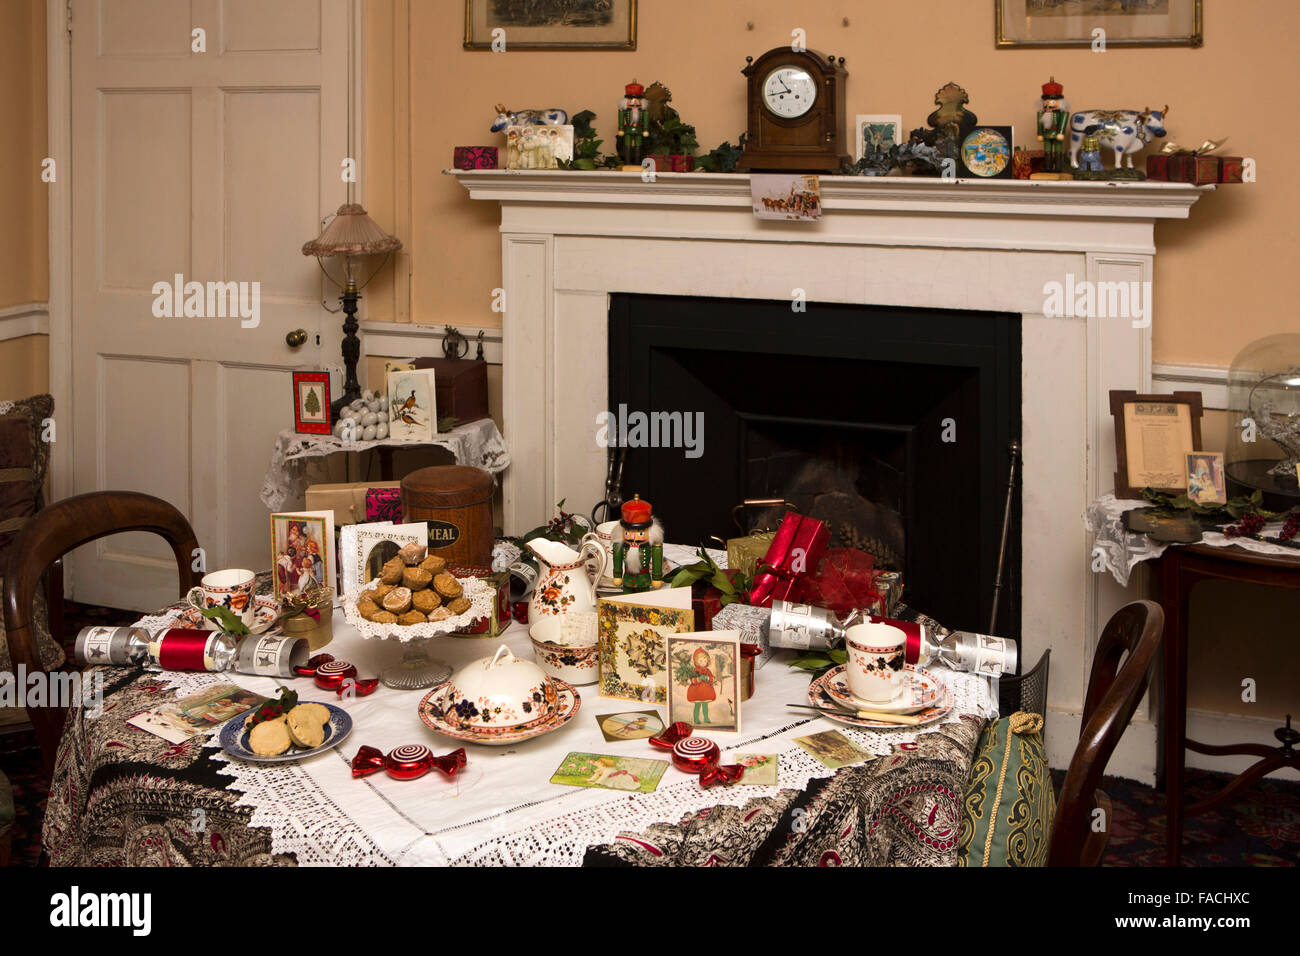 UK, England, Cheshire, Knutsford, Tatton Hall, Housekeeper’s Siting Room Christmas decorations Stock Photo